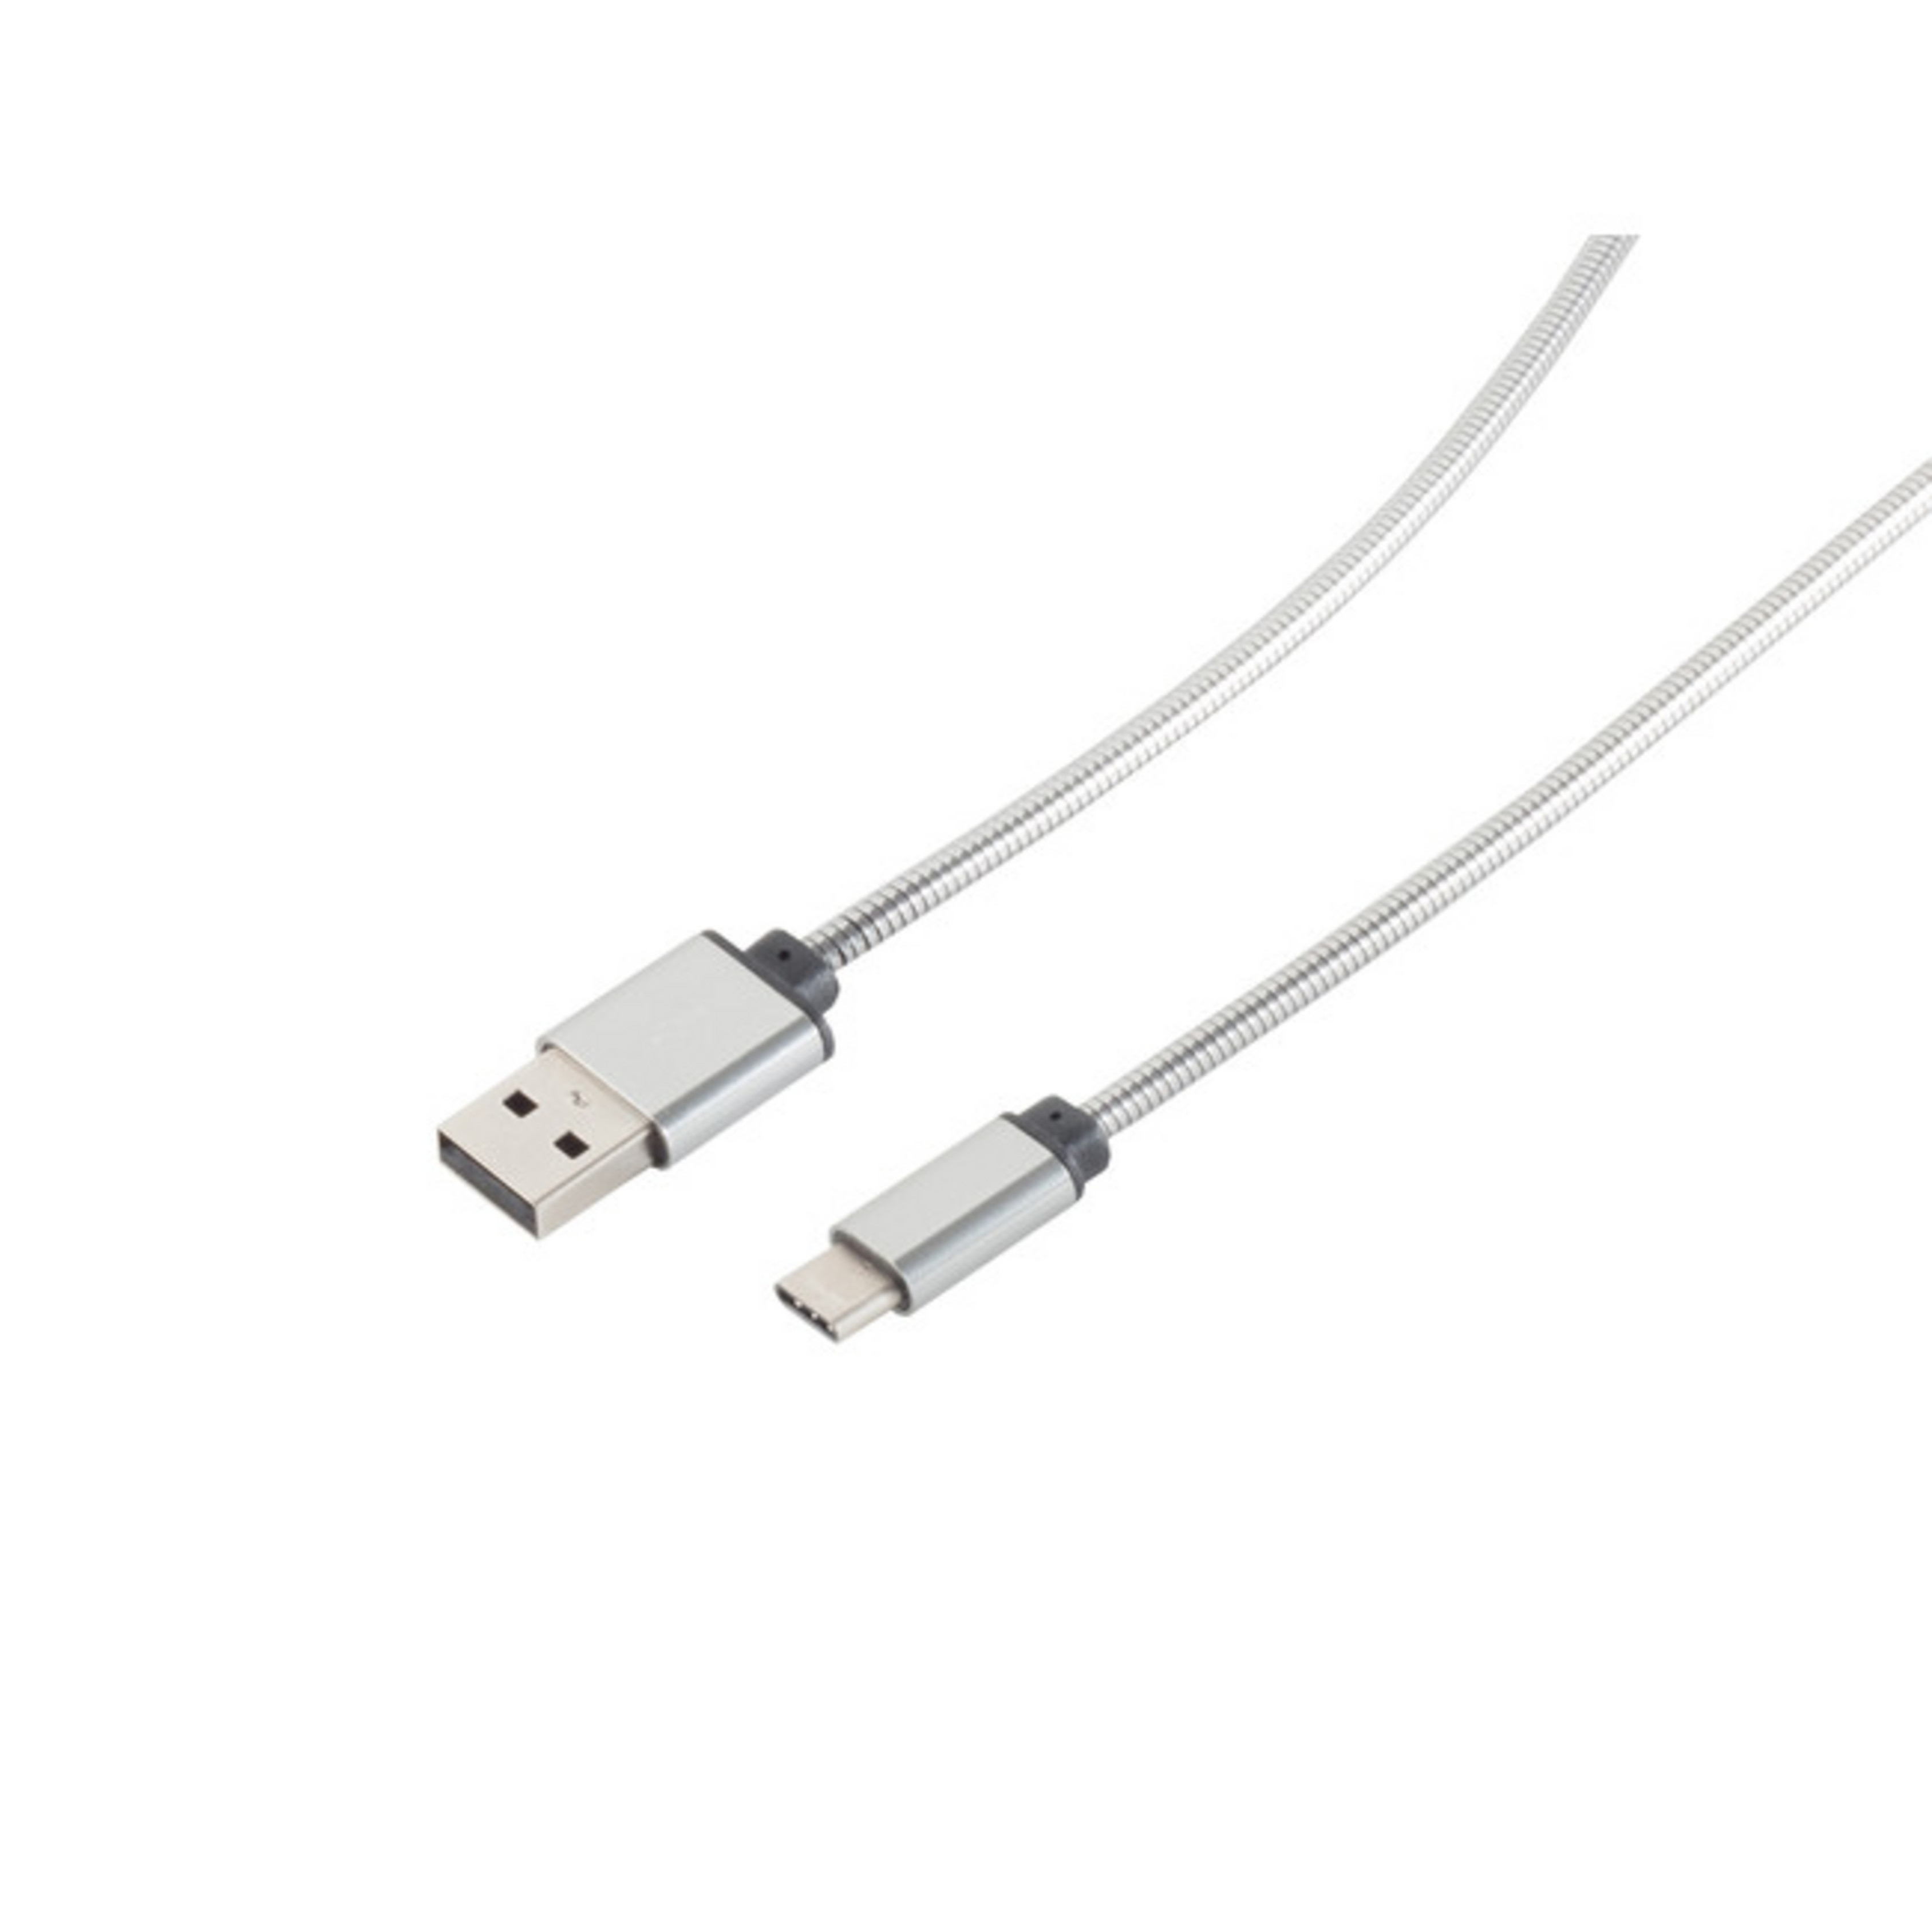 Lade-Sync Silber S/CONN C 3.1 Type USB Kabel CONNECTIVITY Steel USB 1m Kabel A/ MAXIMUM